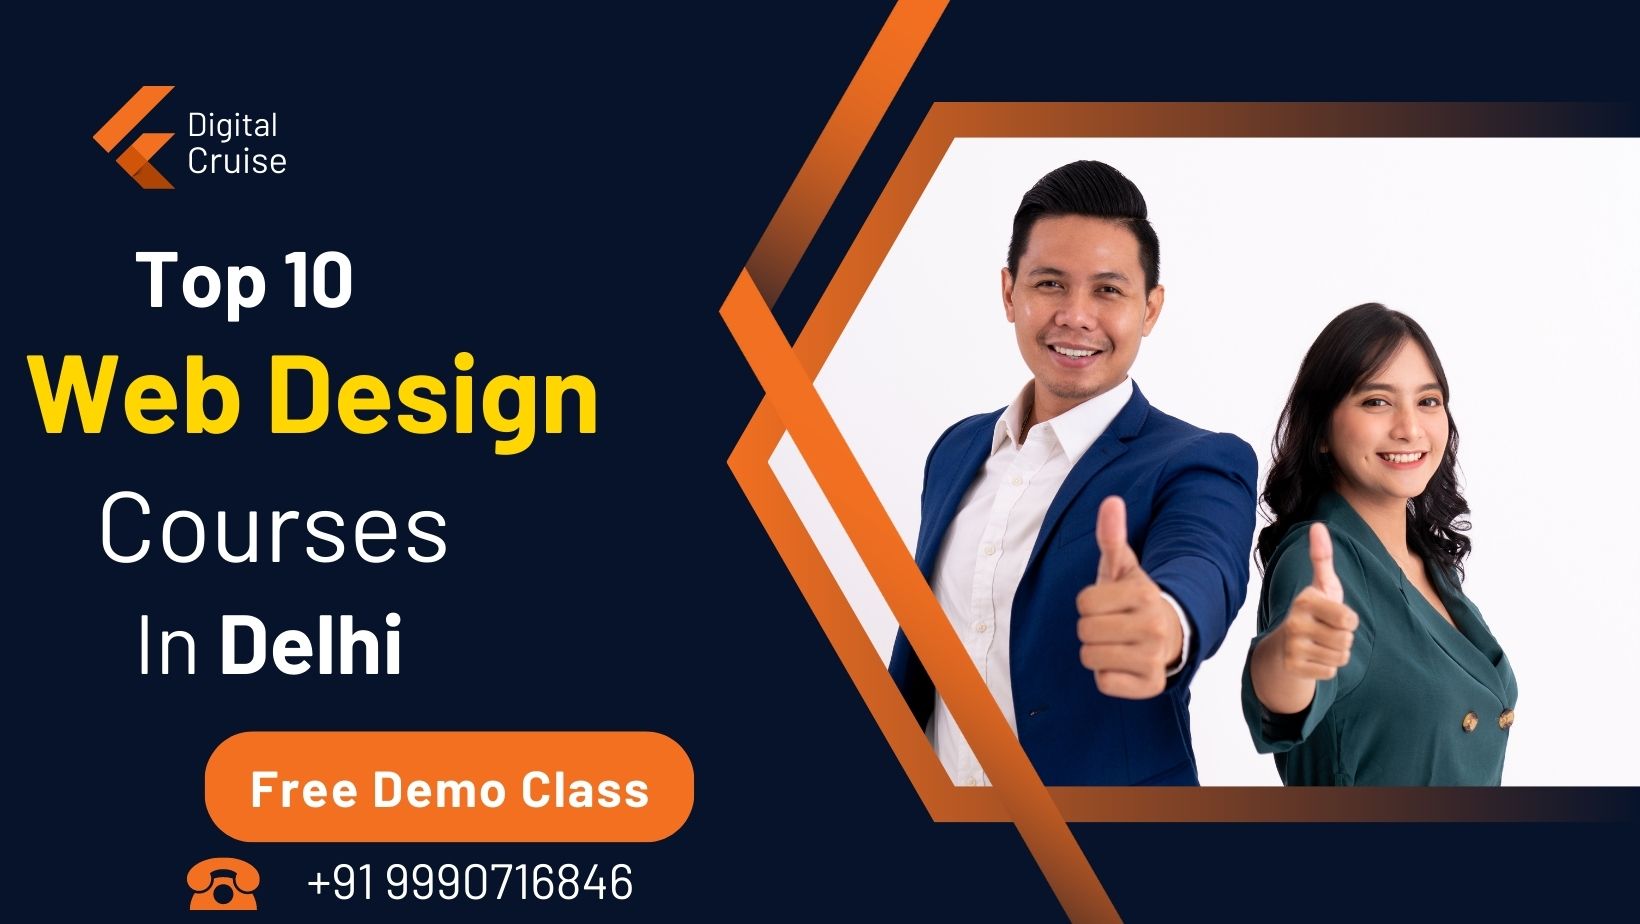 Top 10 Web Design Courses in Delhi With Job Placements & Fees